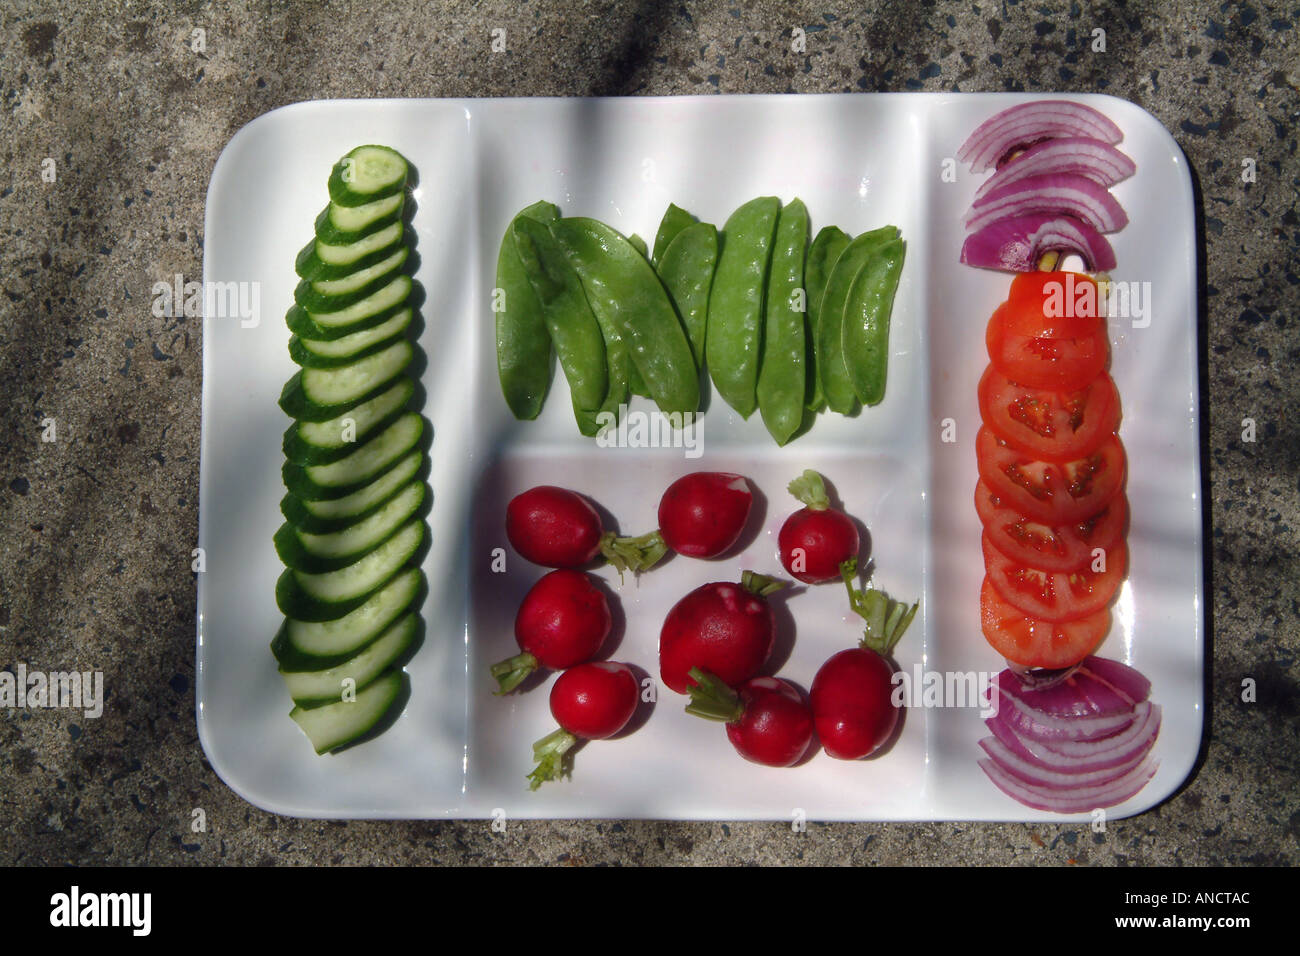 Vegetable tray, lunch dish Stock Photo